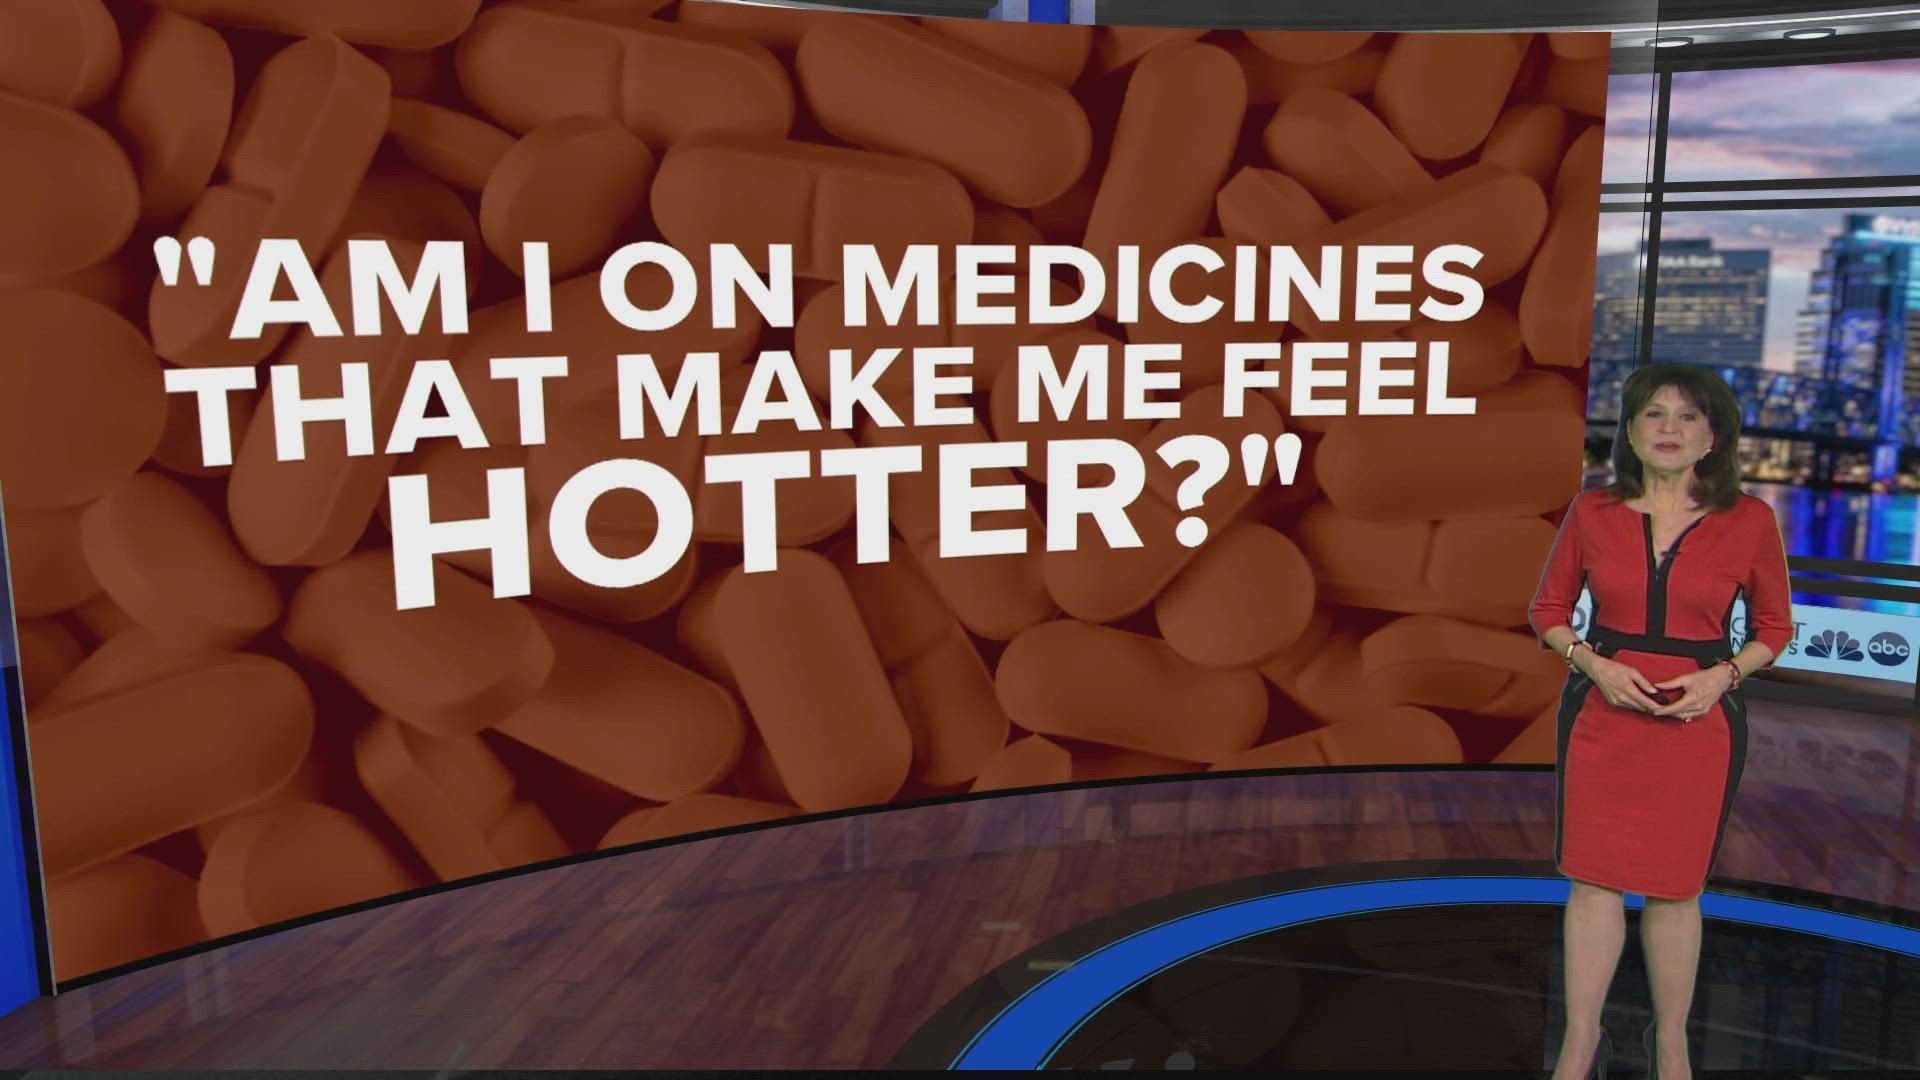 Are there some people who feel hotter because of the medicines they take? Doctors say yes.